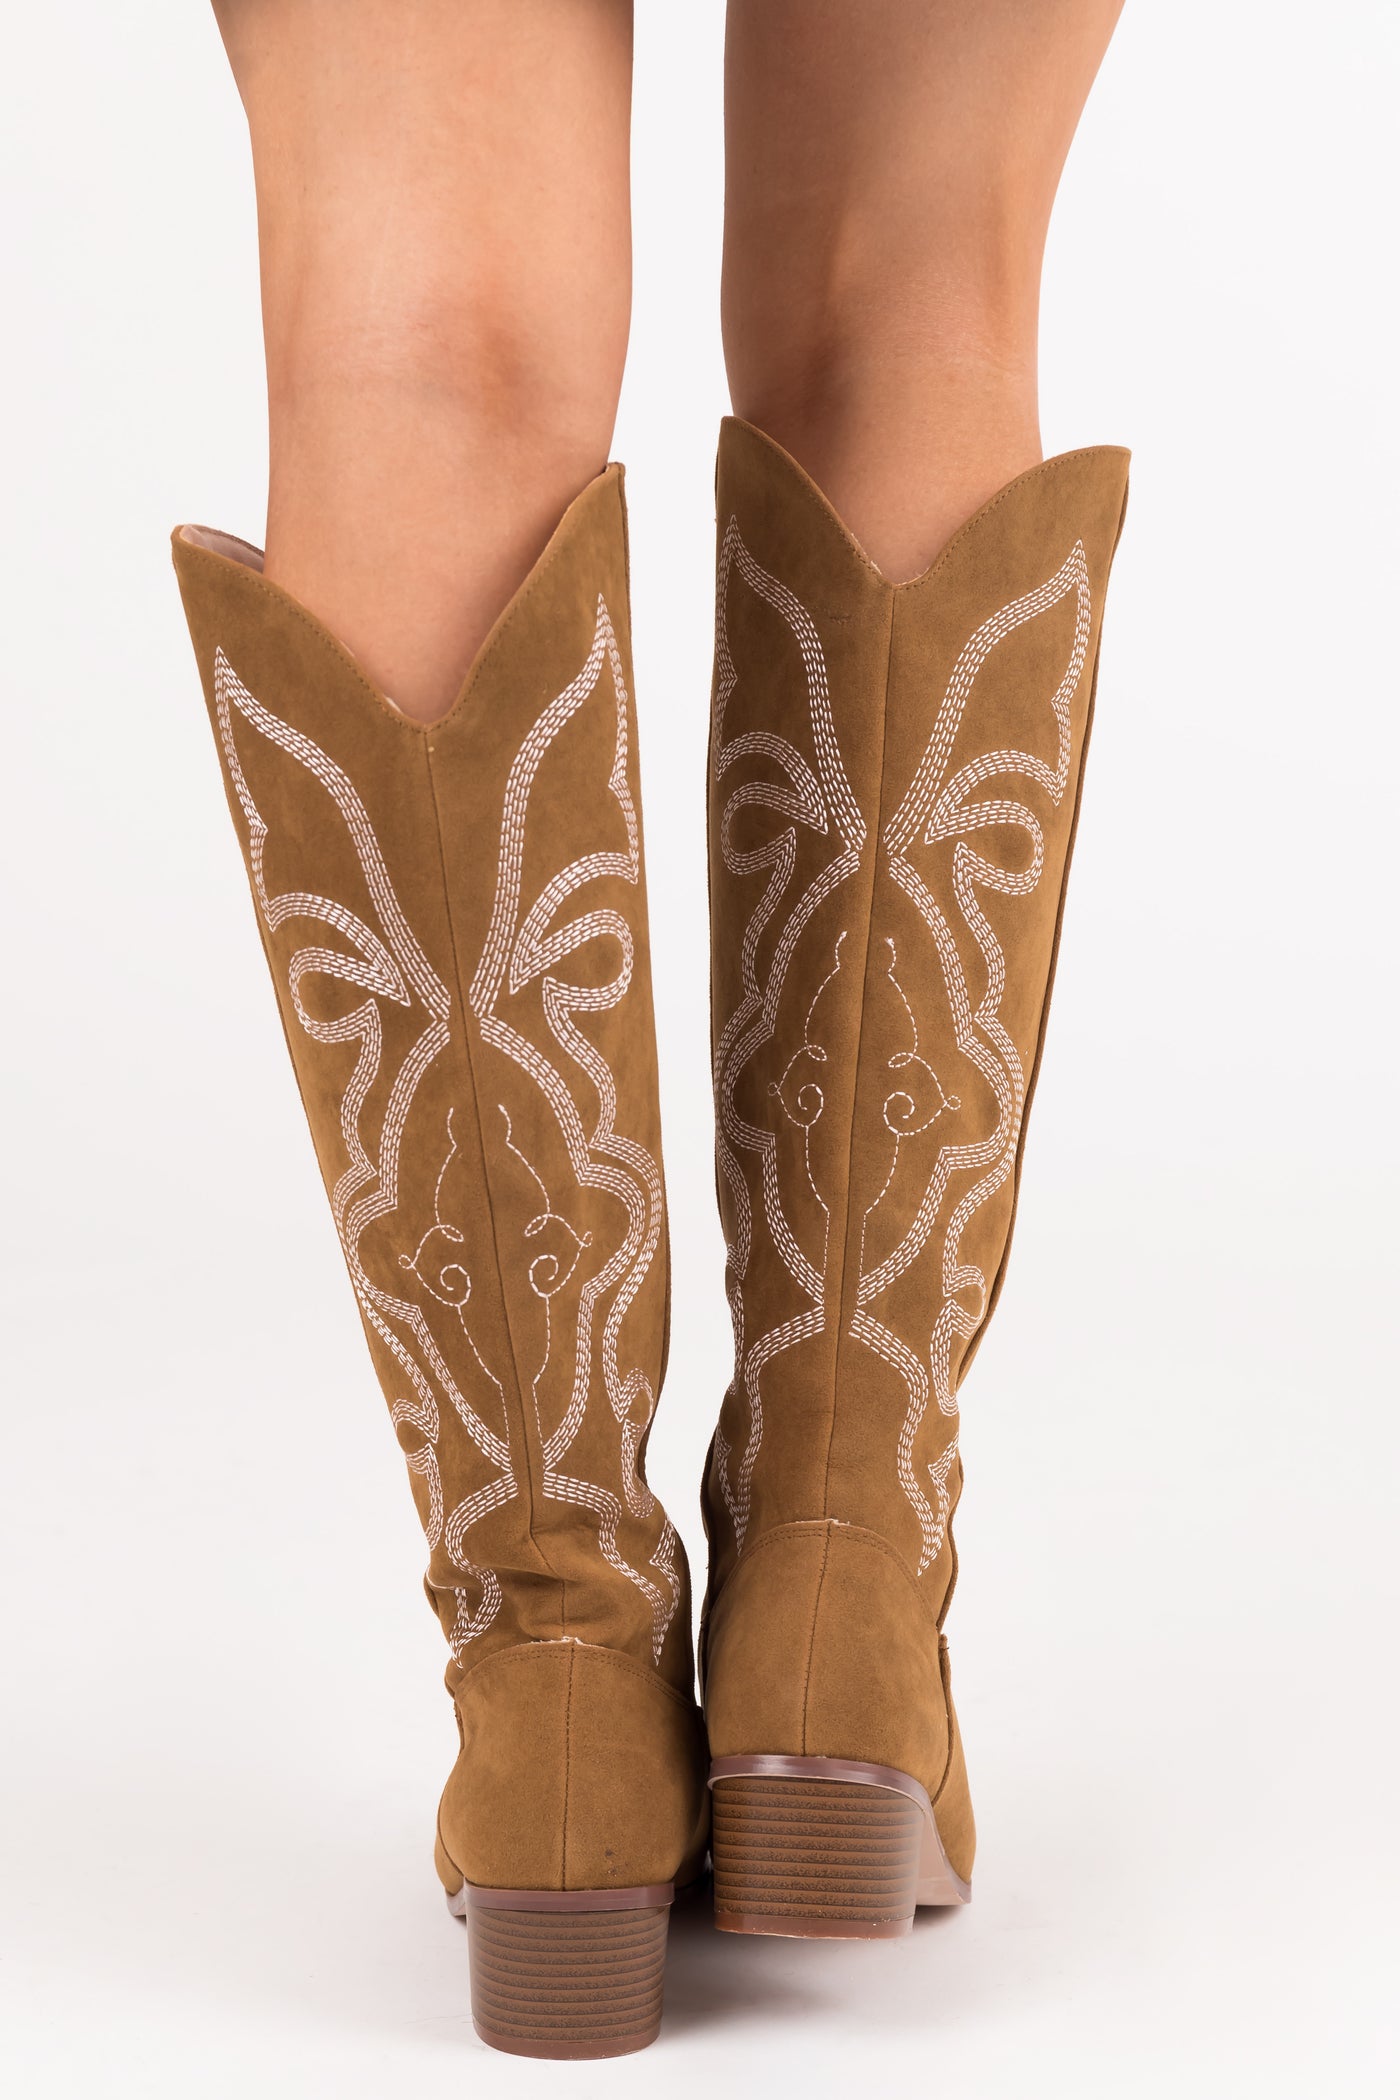 Sepia Pointed Toe Knee High Western Boots